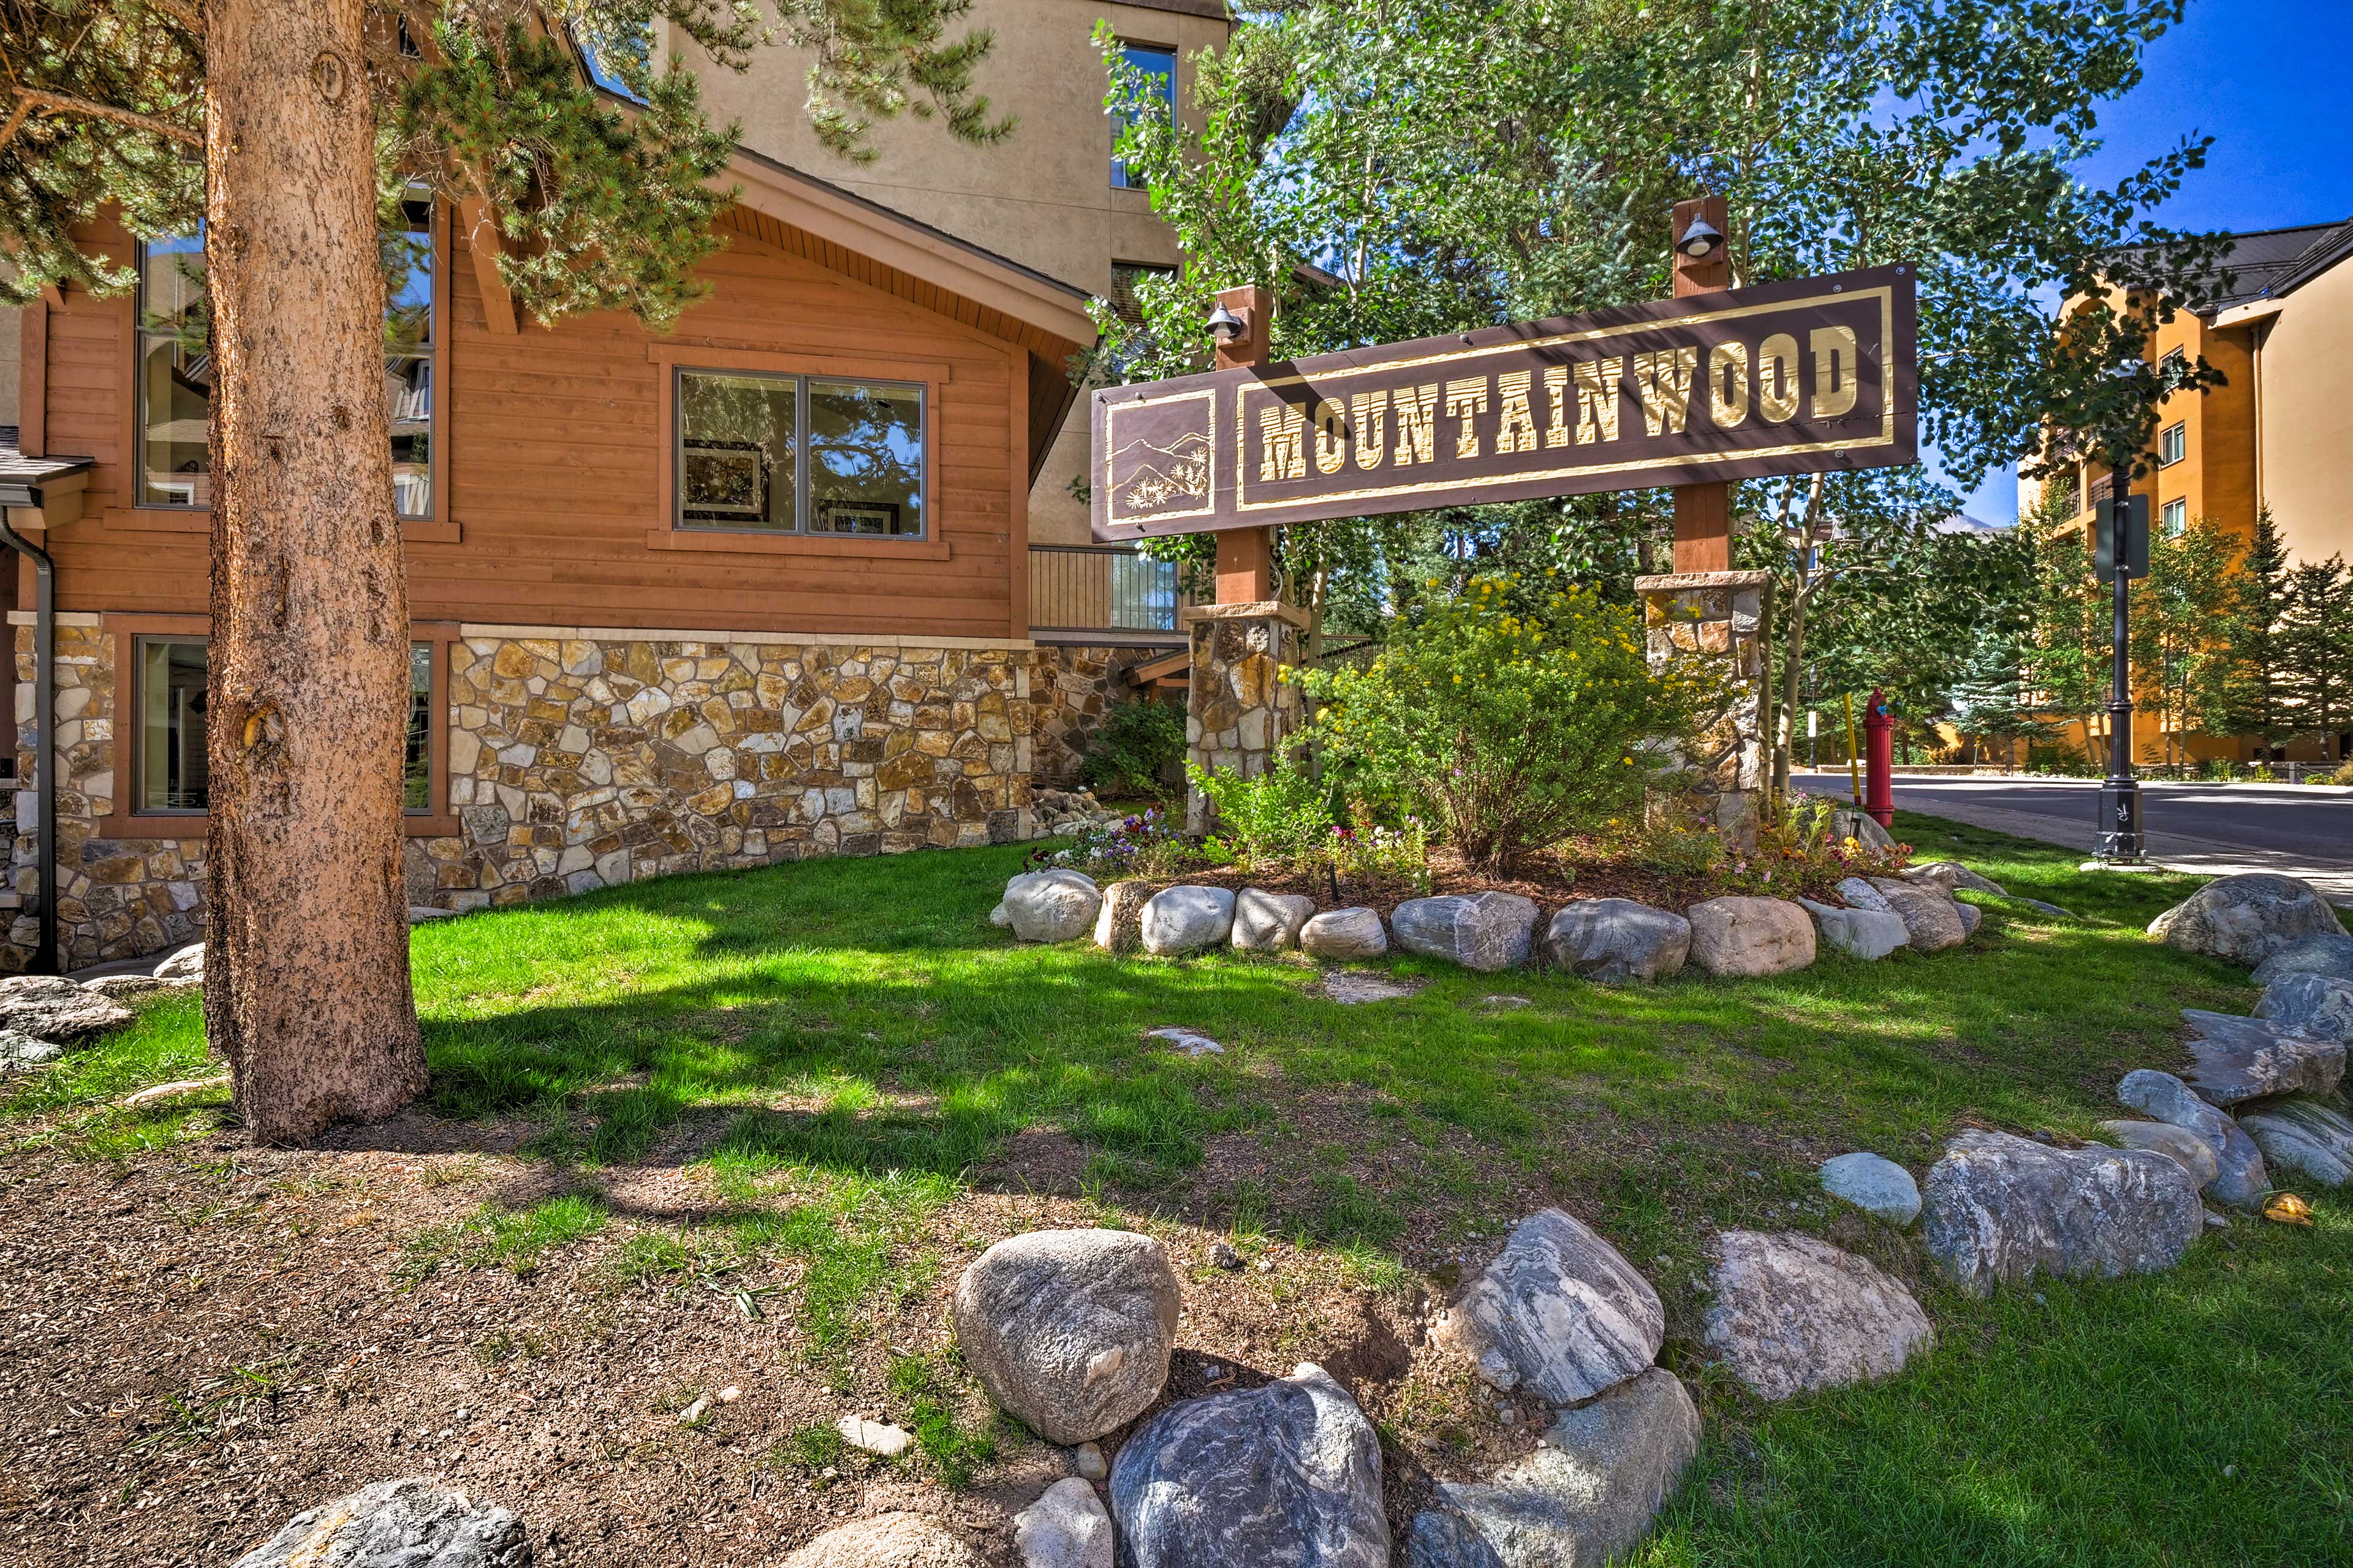 Located in the Mountainwood Condos, you can walk to the lifts 200 yards away!